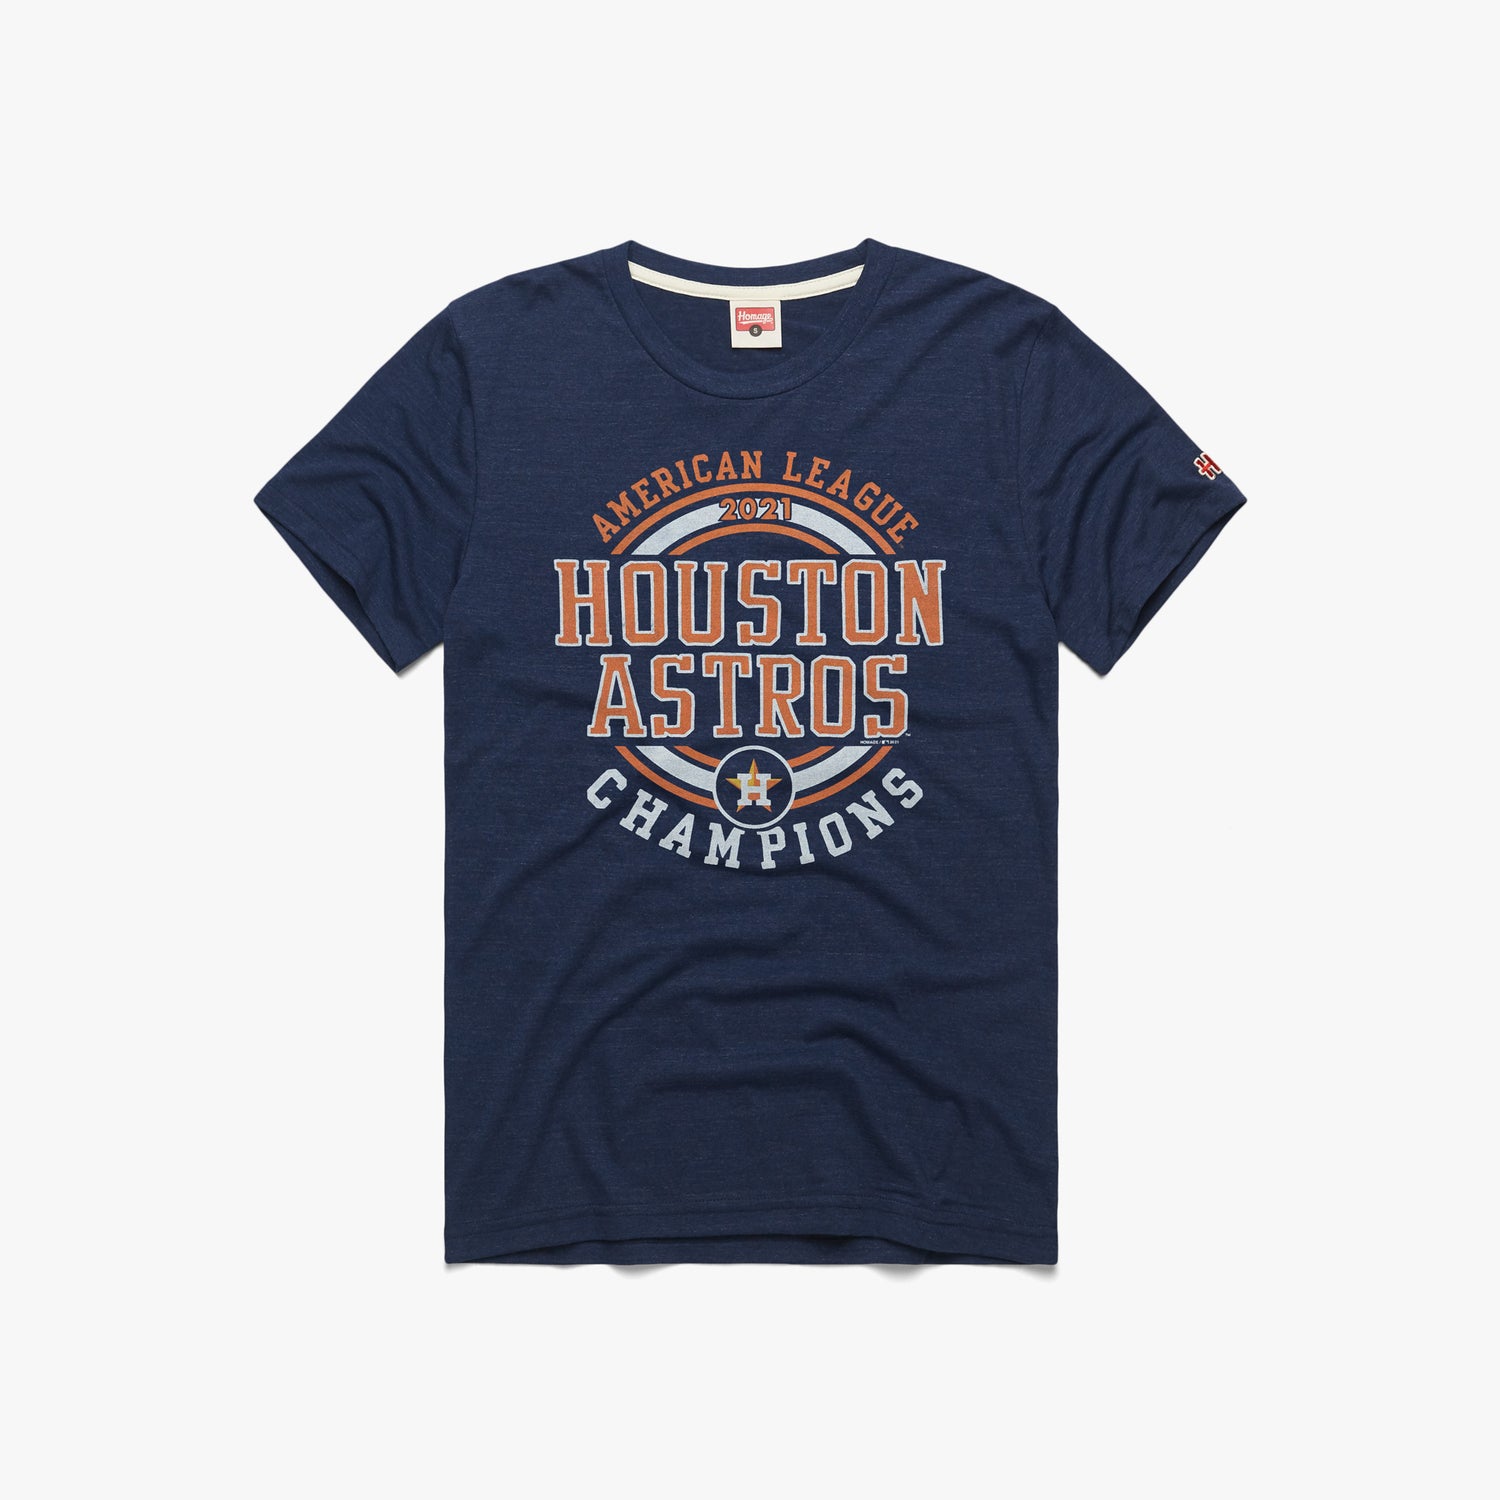 Houston Astros 2021 Al Champions T-Shirt from Homage. | Navy | Vintage Apparel from Homage.